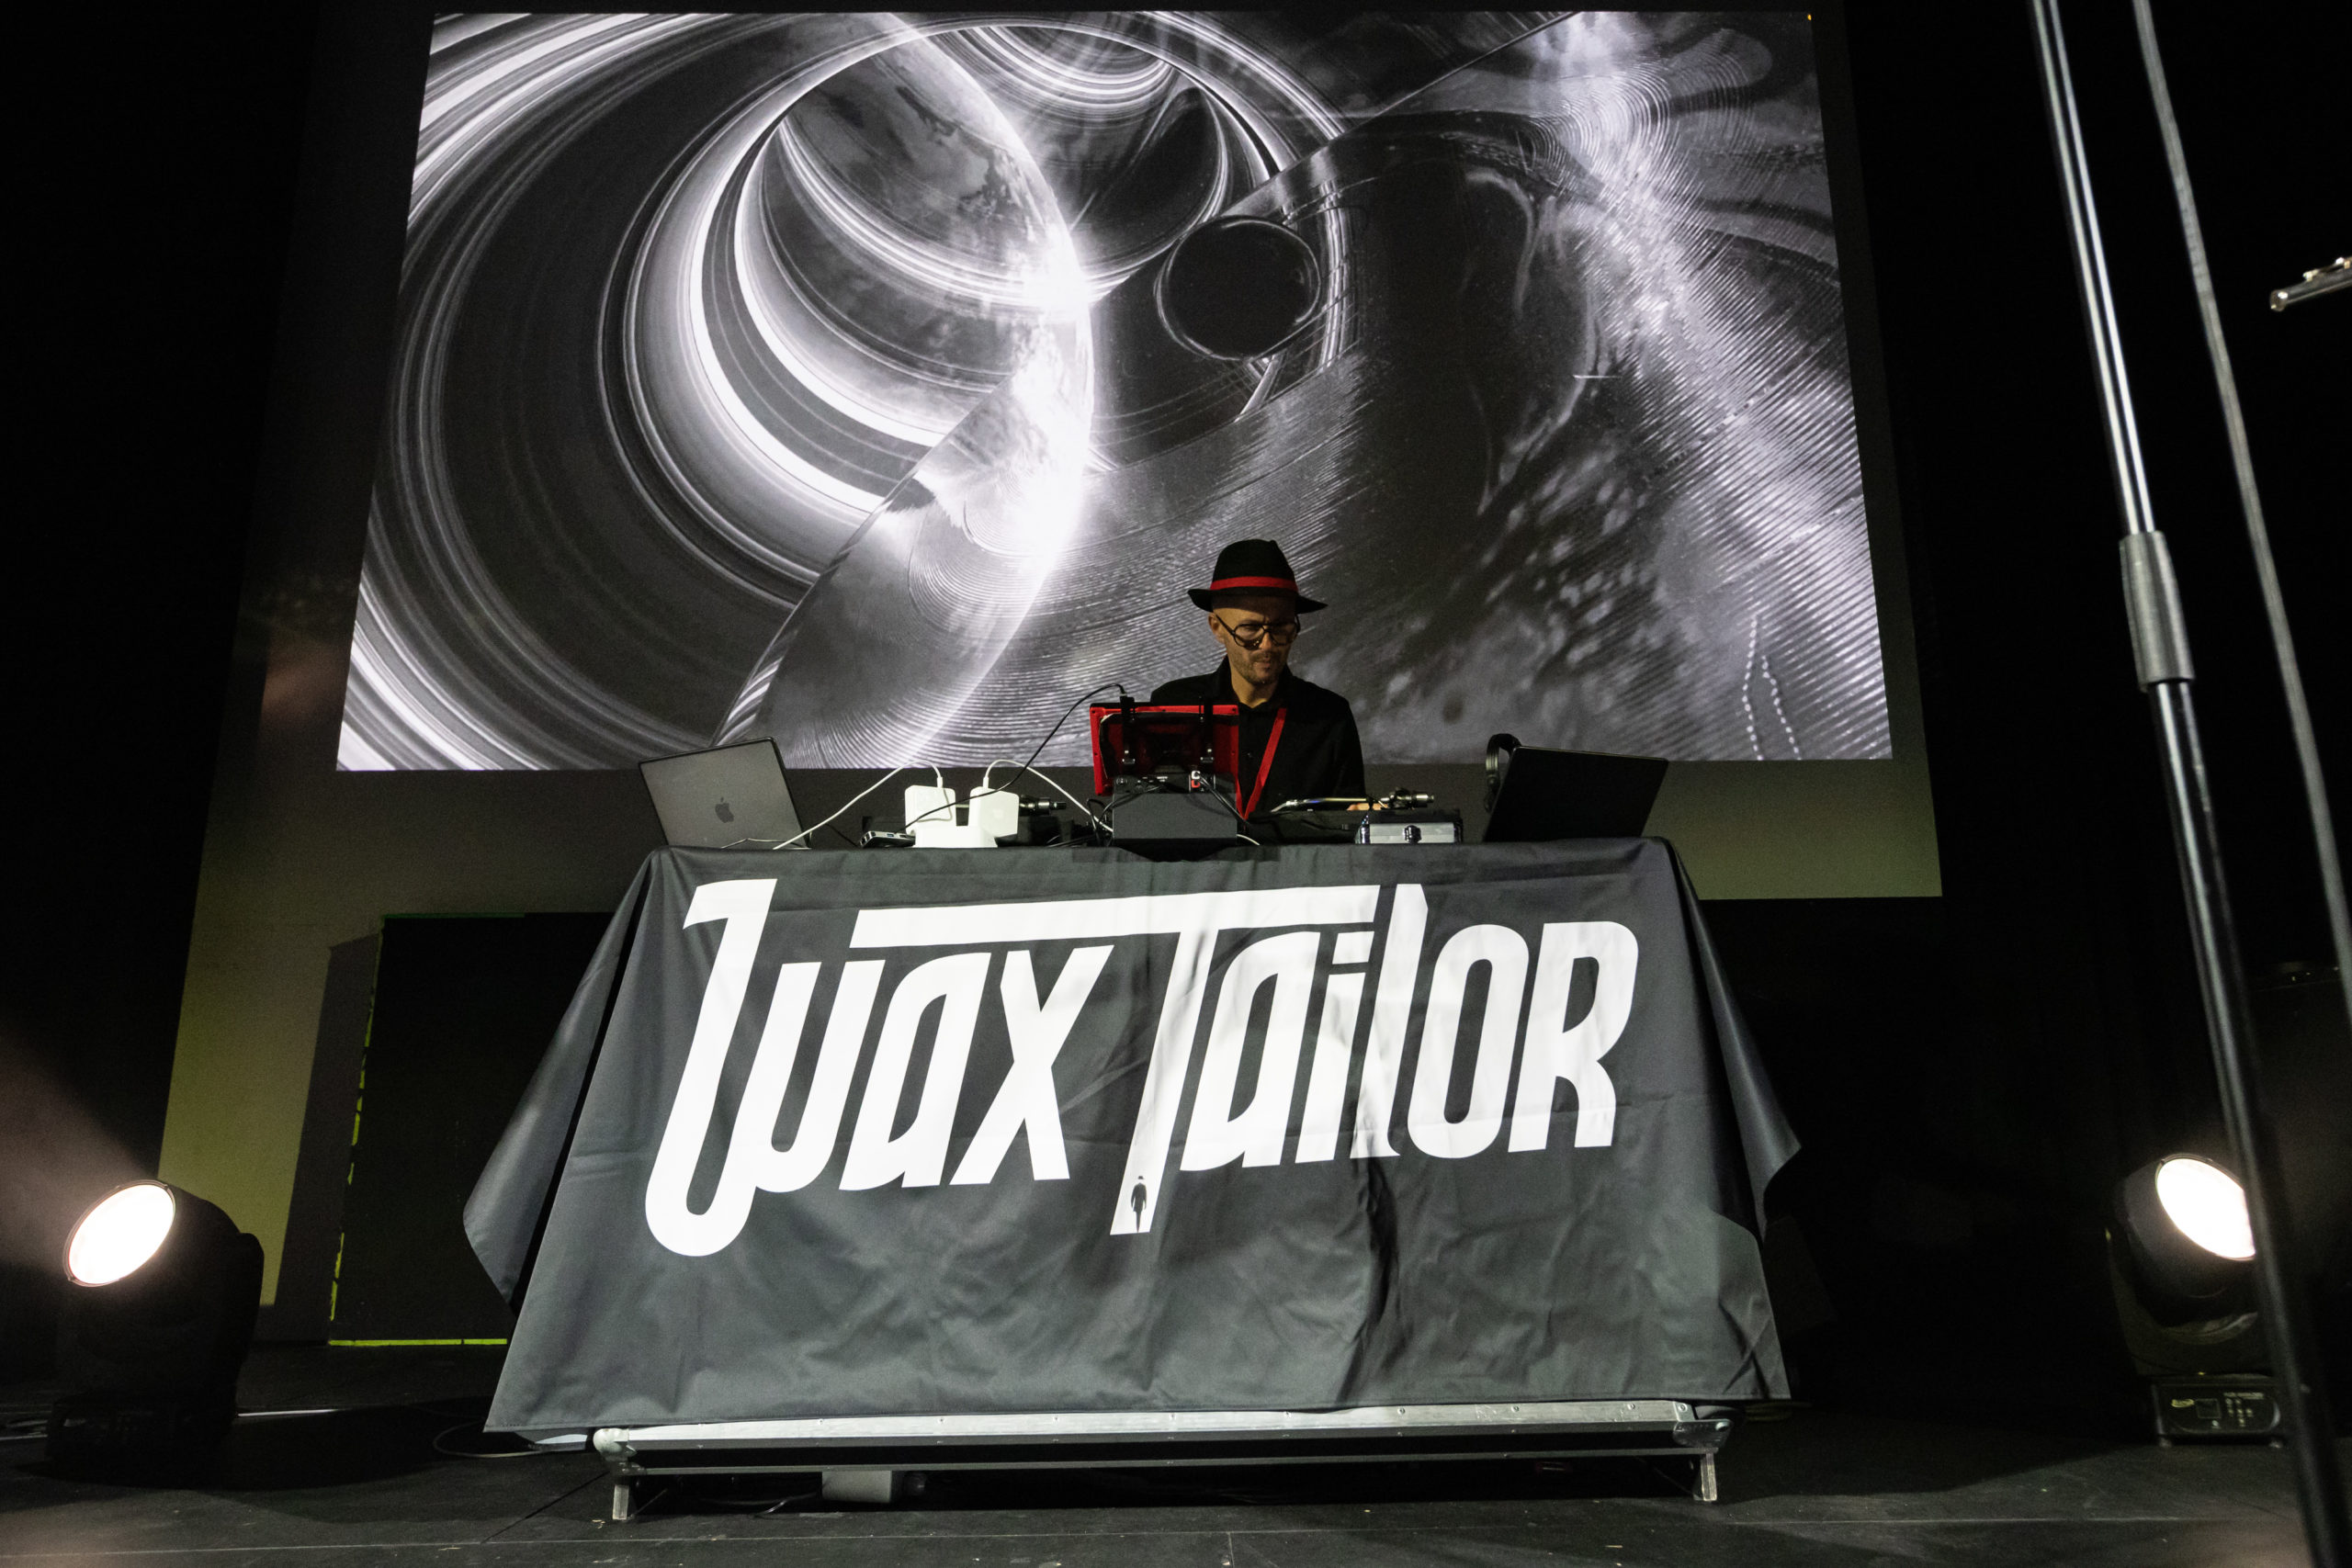 Wax Tailor takes the stage at the Hollywood Theatre with two turntables and a projection behind him